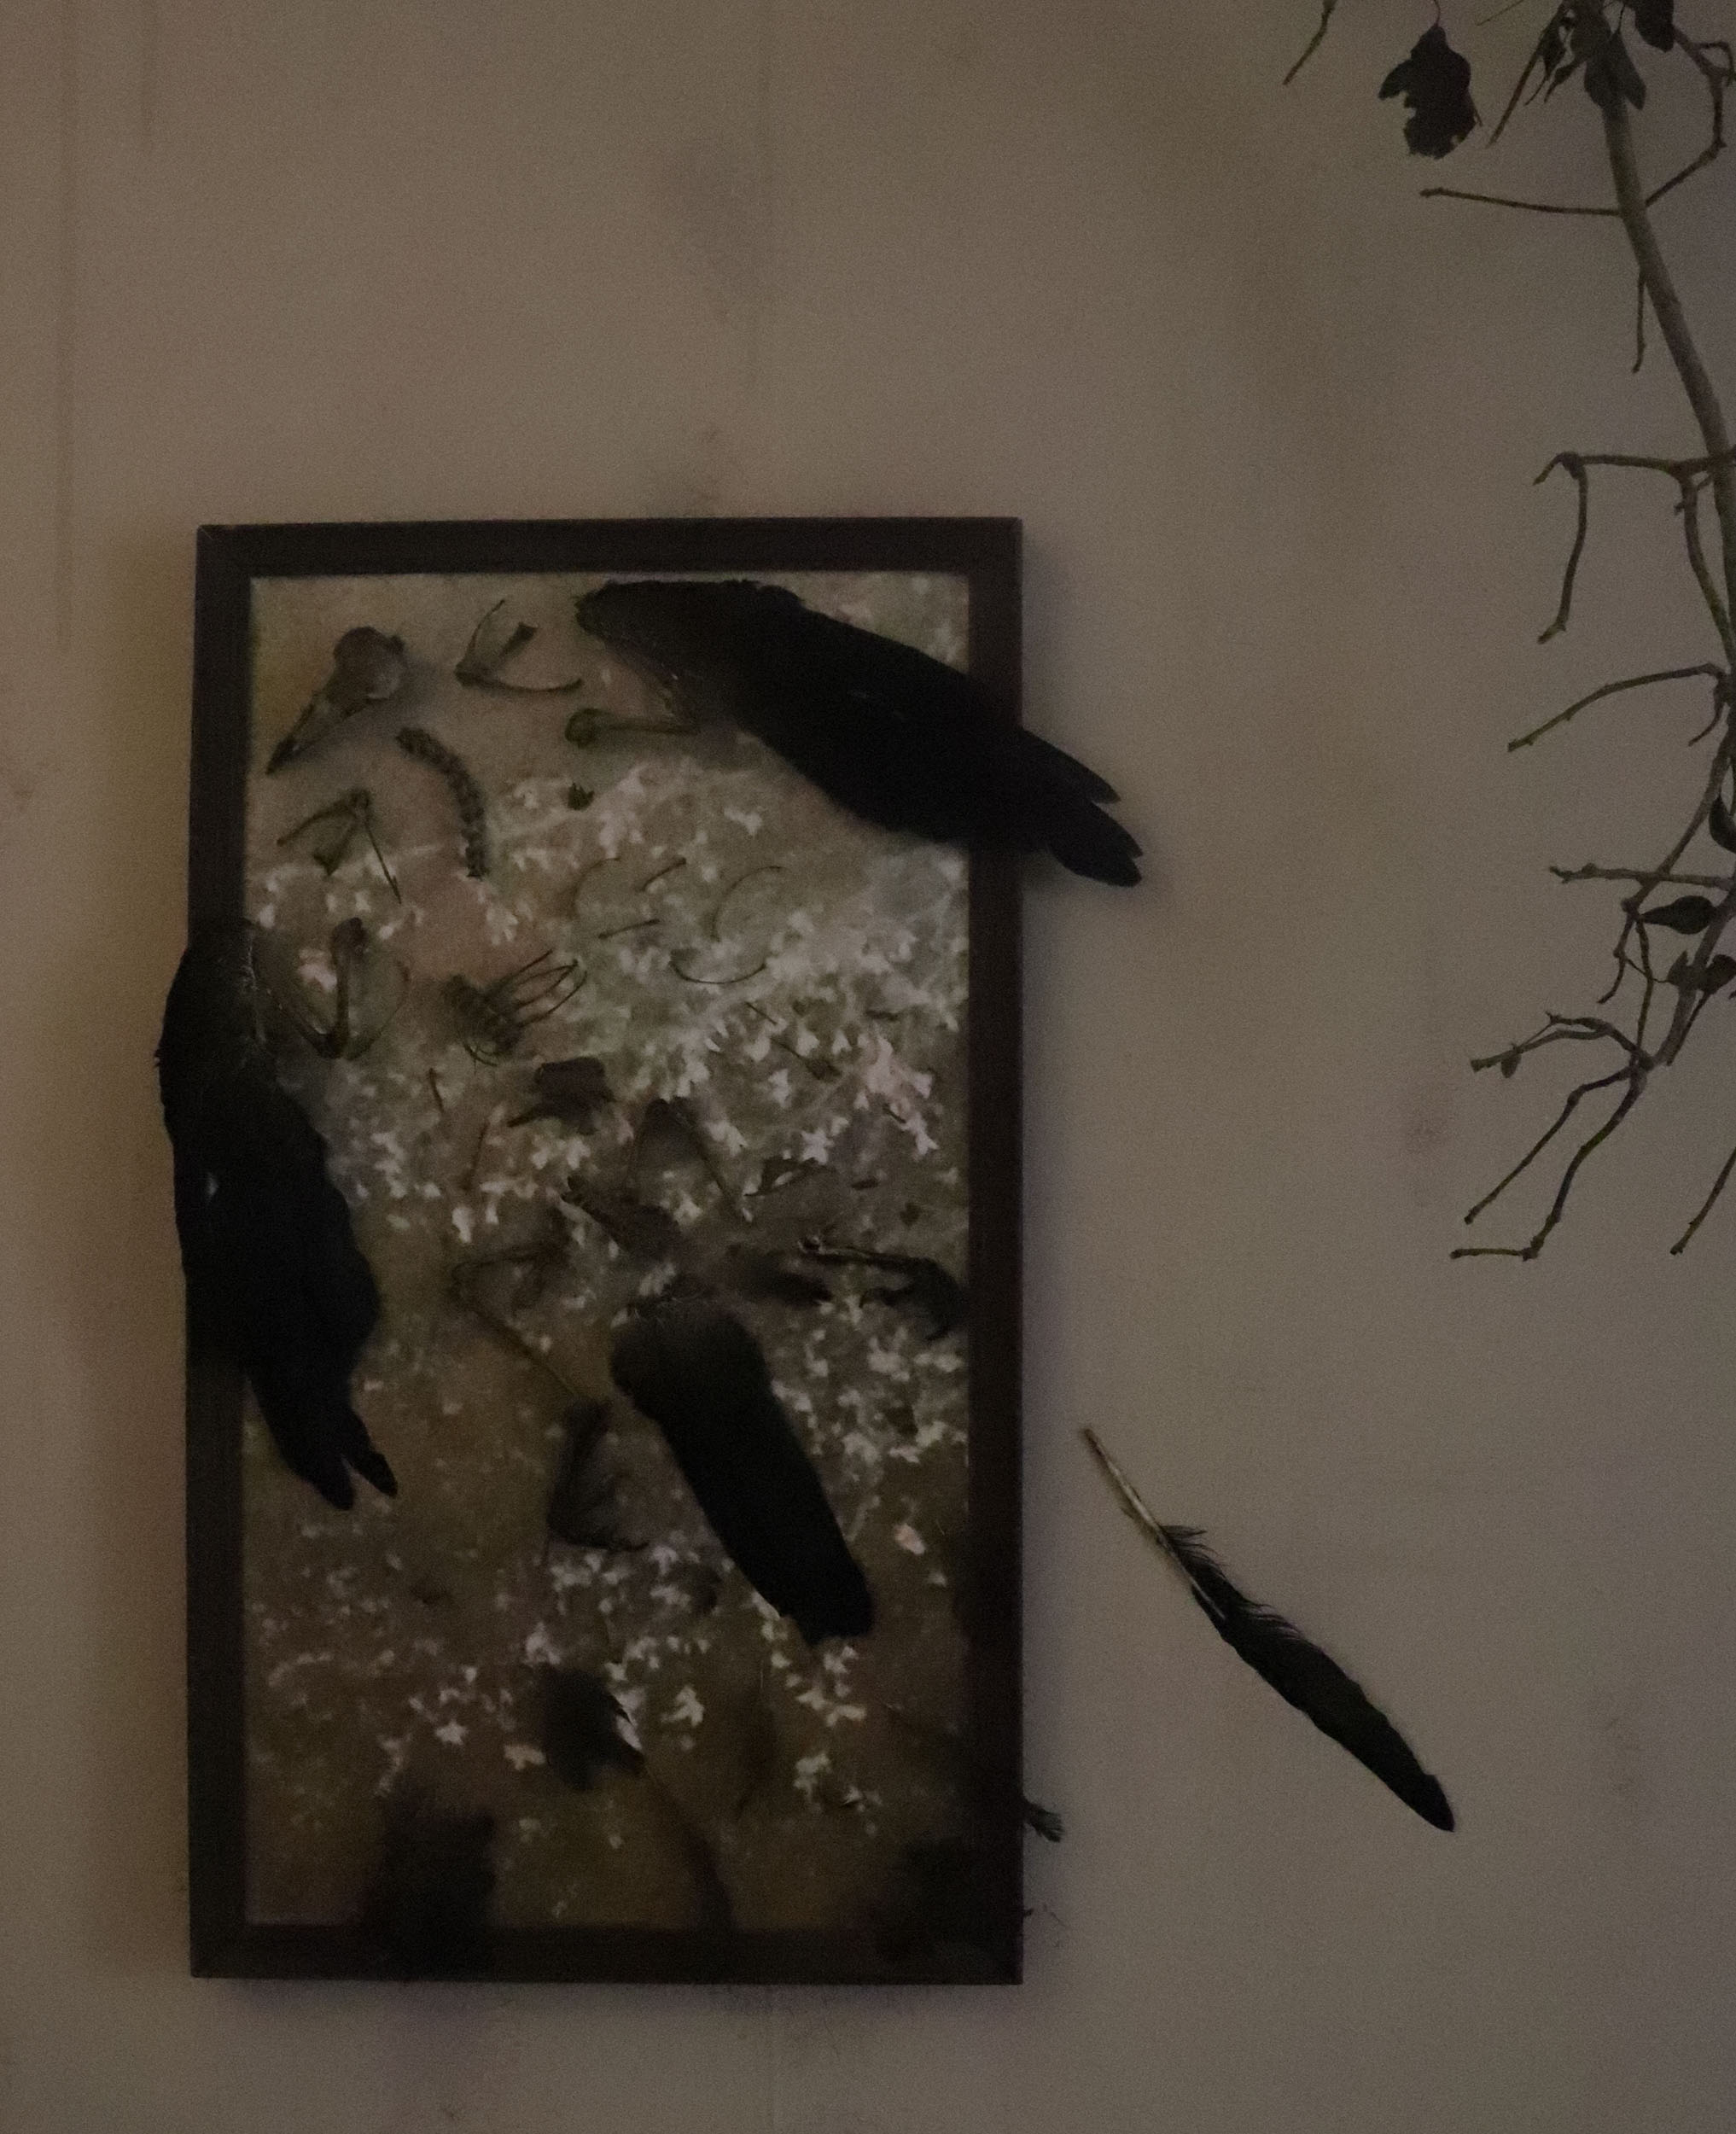 Wall hanging artwork by Zoë Bullen, displaying broken skeletal remains with some feathers, of a roadkill crow, arranged over matt printed photograph of foliage, and old wooden picture frame.